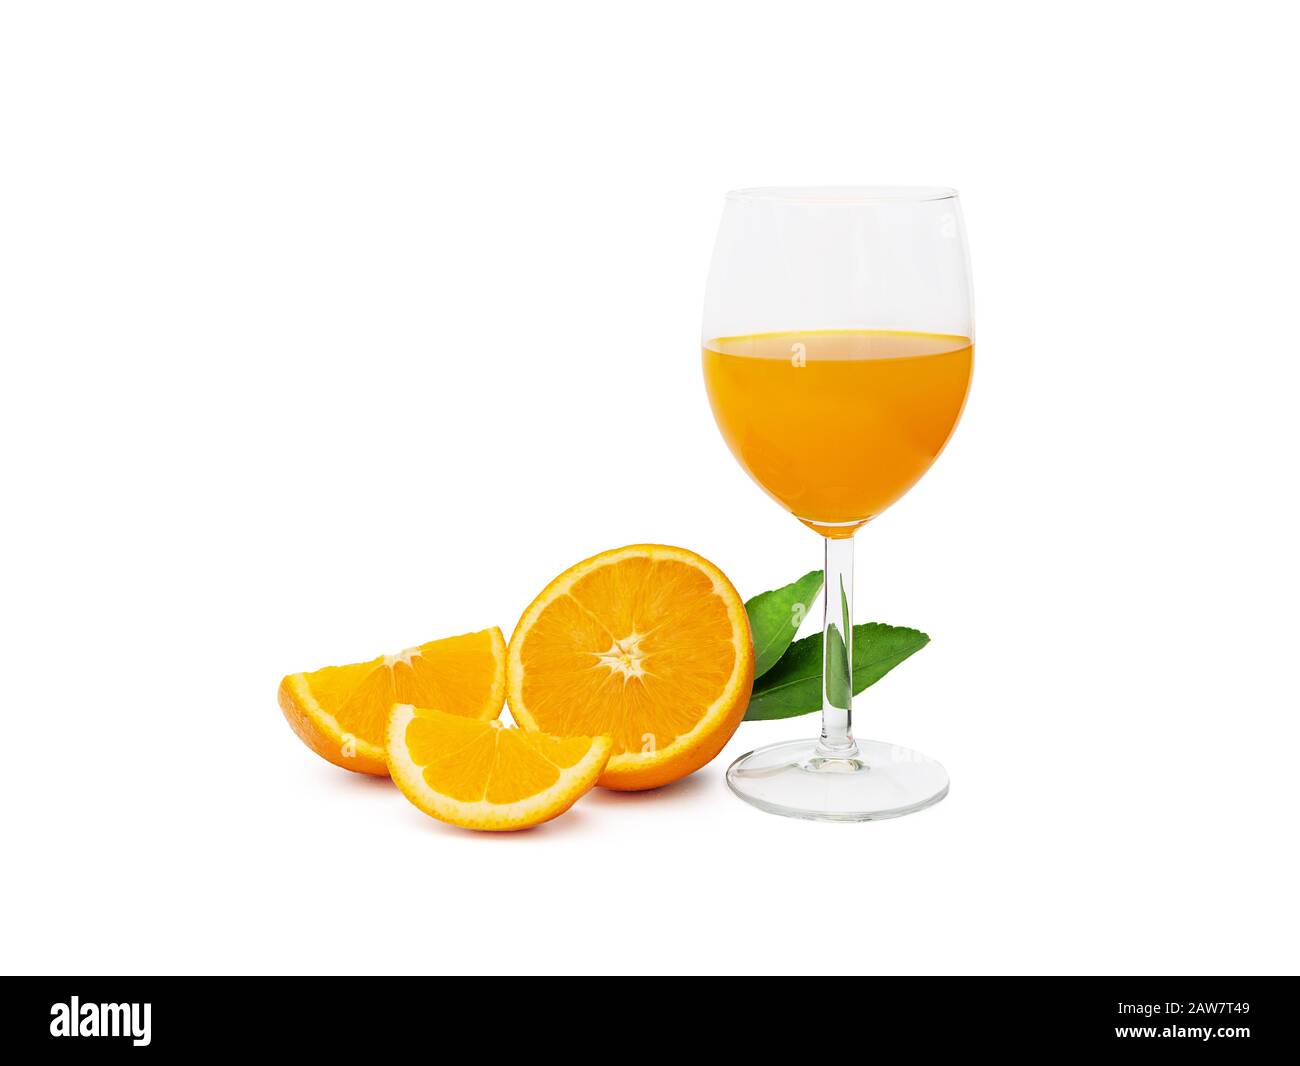 a glass of fresh orange juice and group of fresh orange fruits with green leaves, isolated on white background, clipping path include. fruit product d Stock Photo